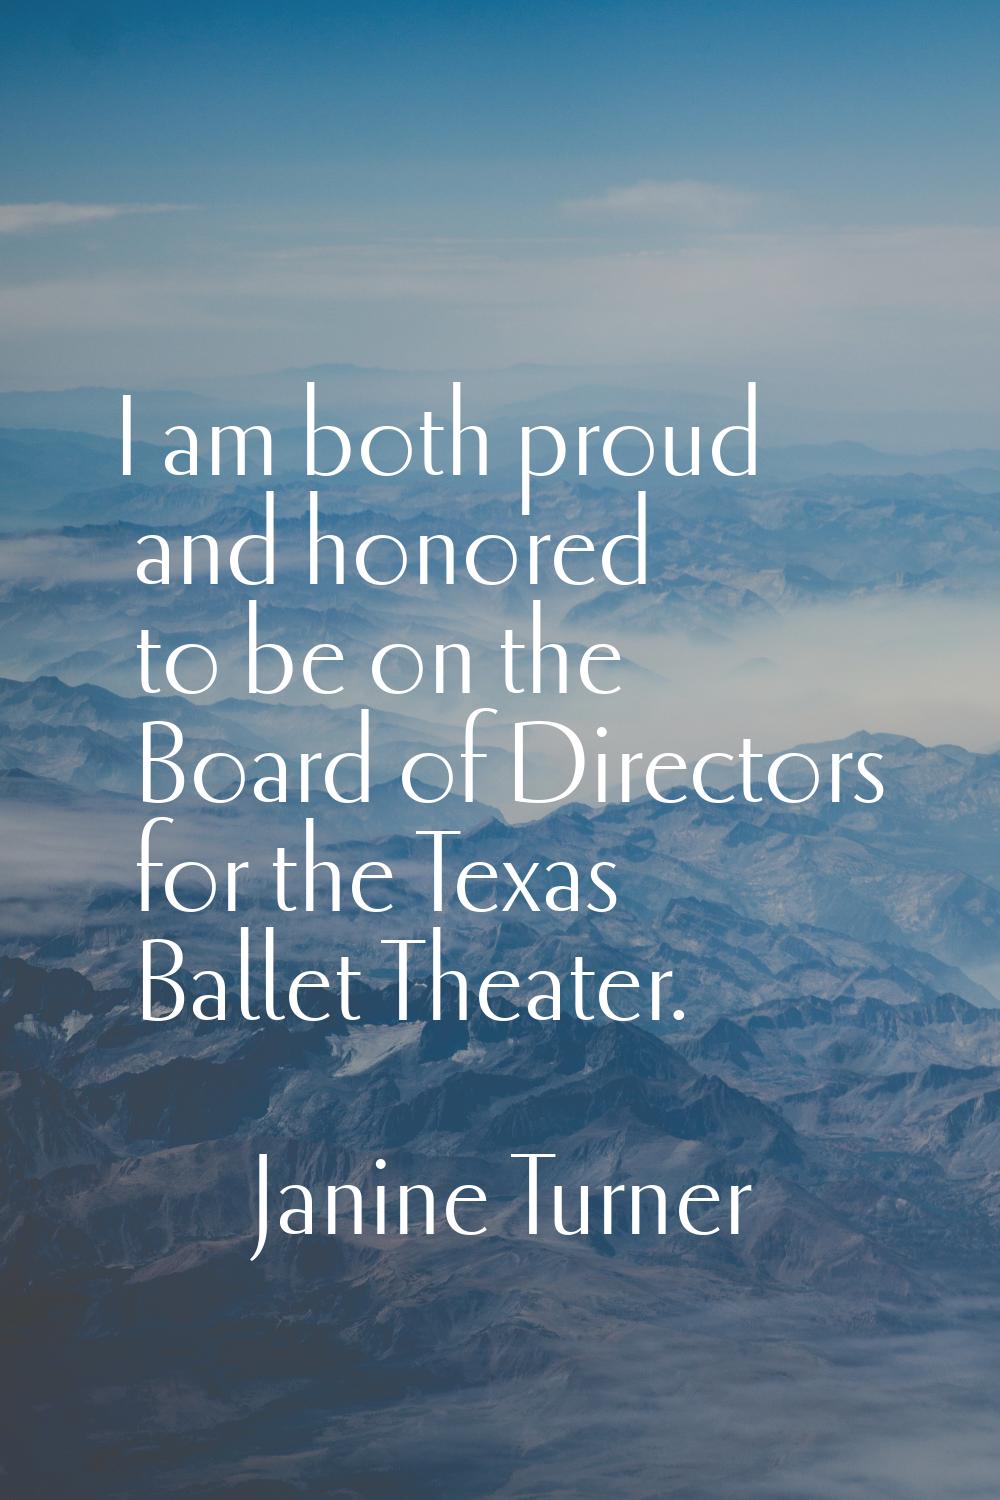 I am both proud and honored to be on the Board of Directors for the Texas Ballet Theater.